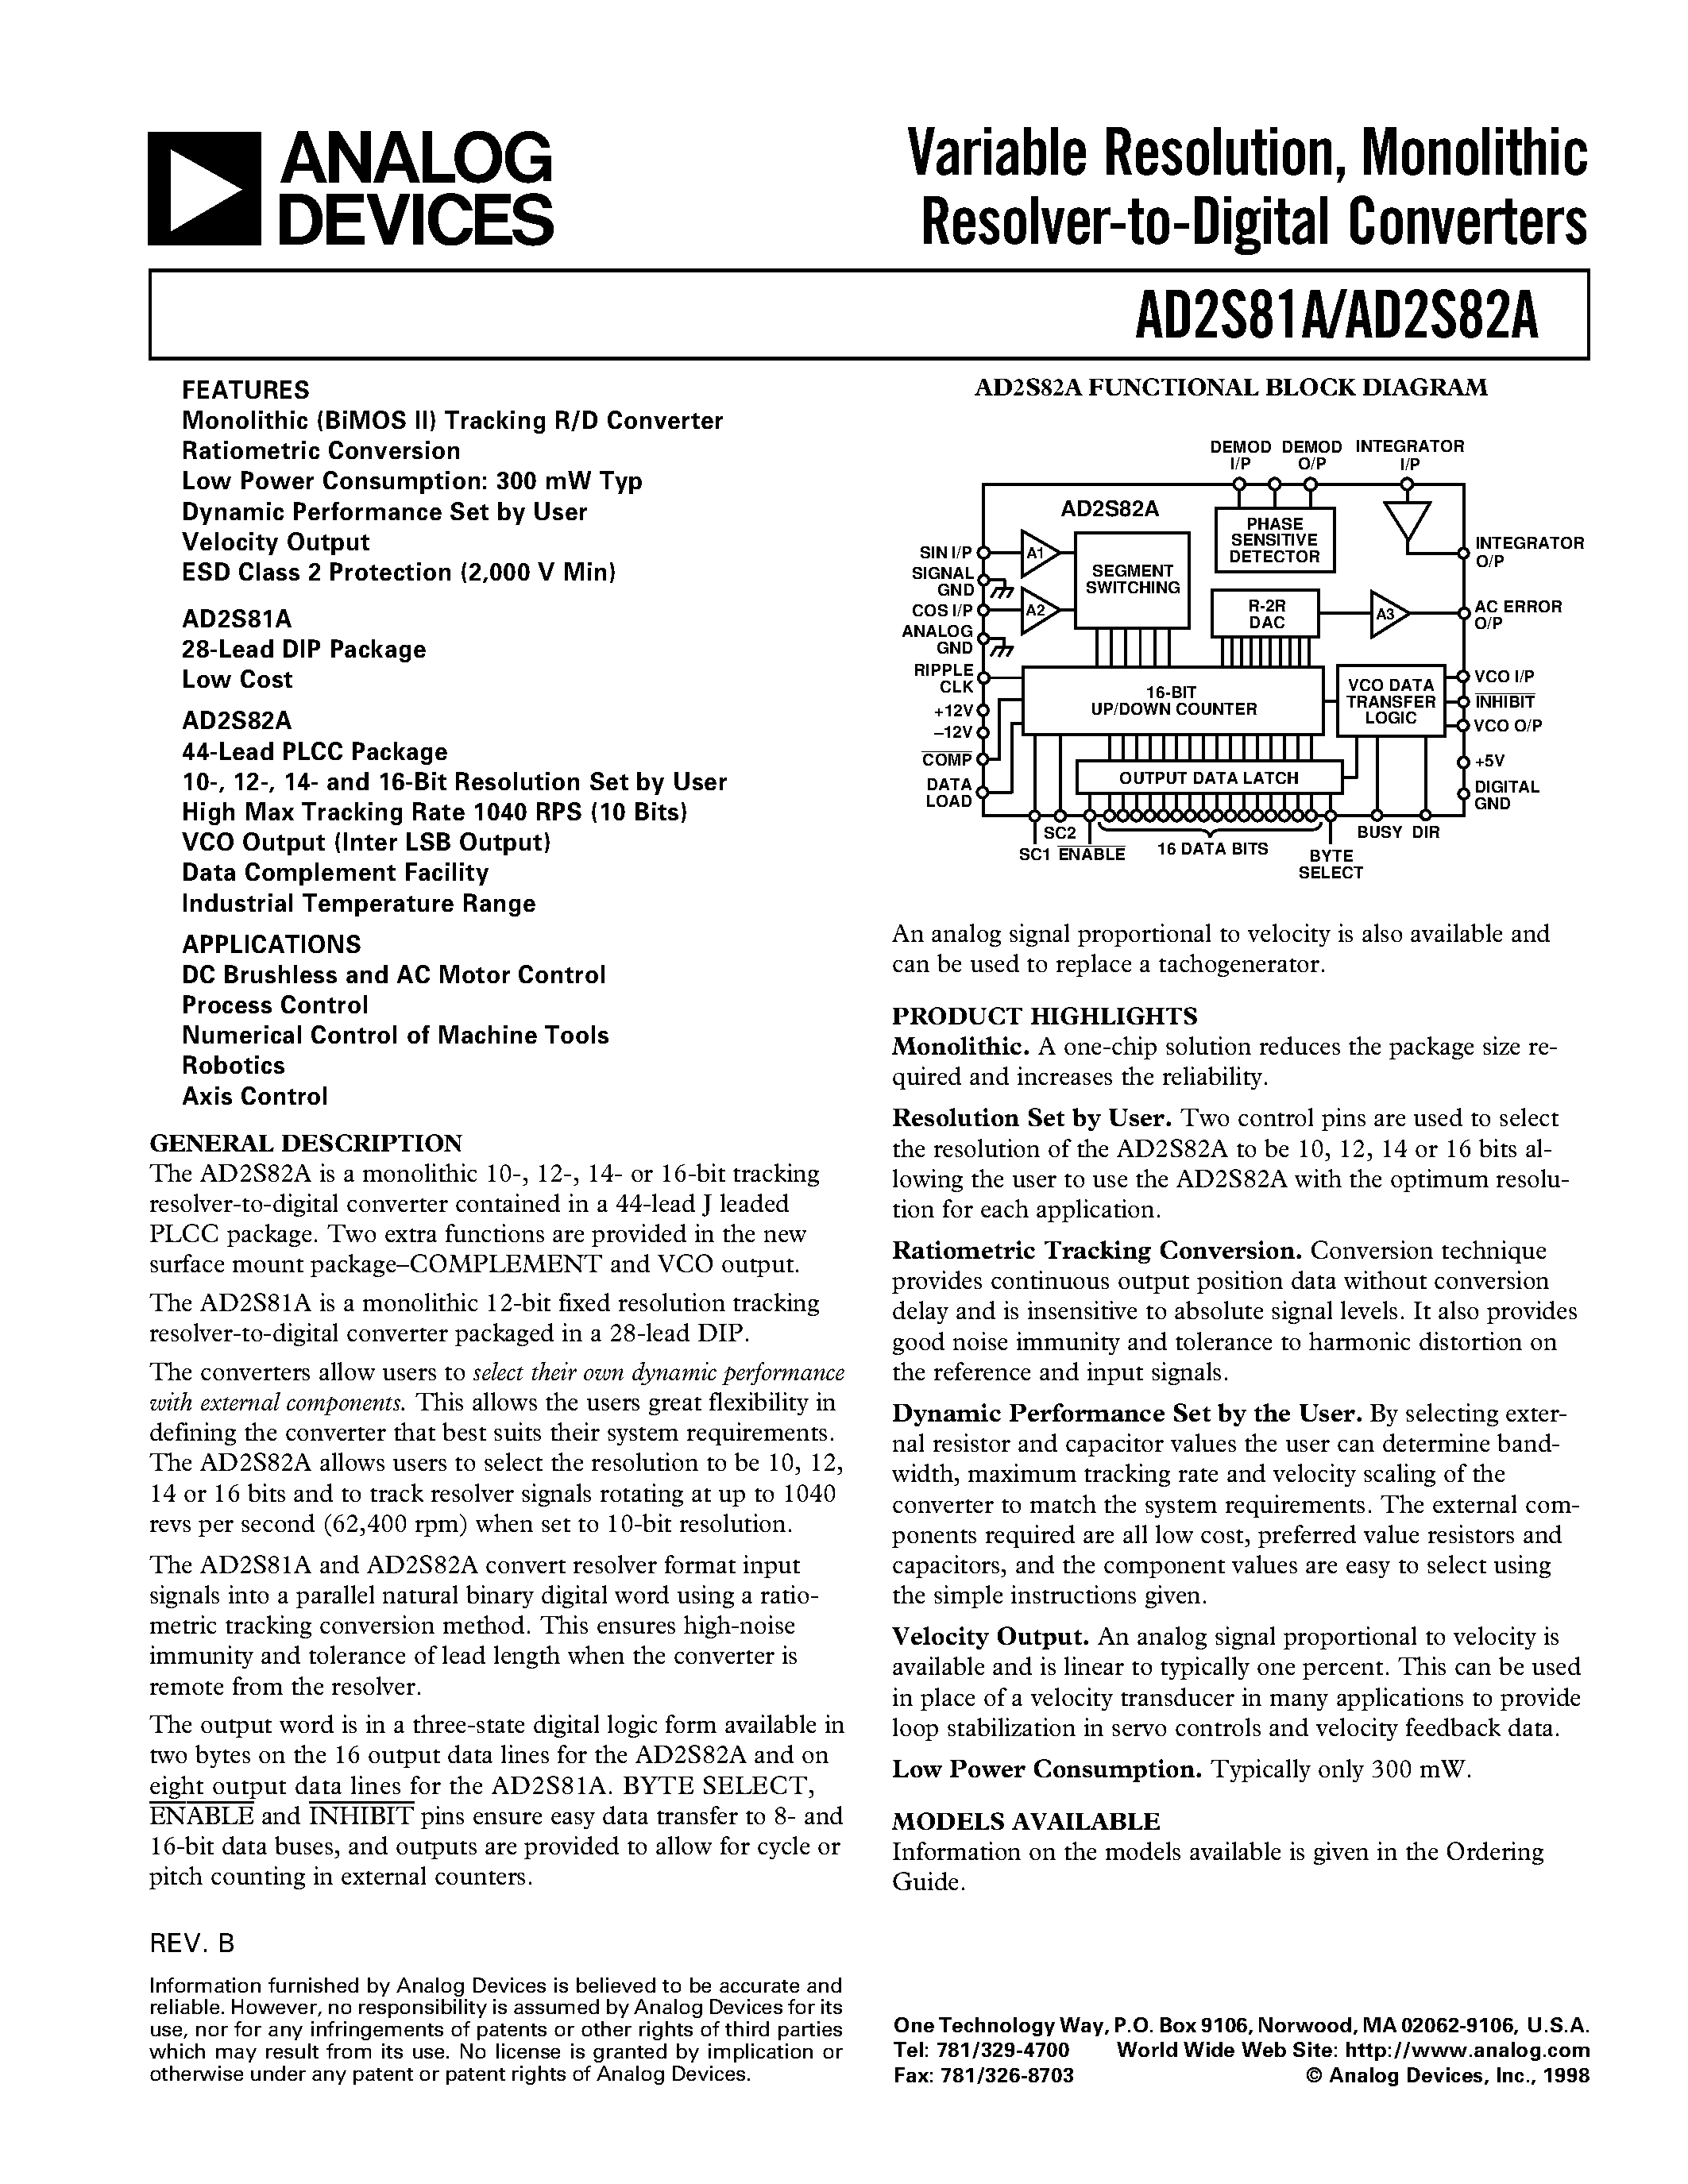 Datasheet AD2S81 - Variable Resolution/ Monolithic Resolver-to-Digital Converters page 1